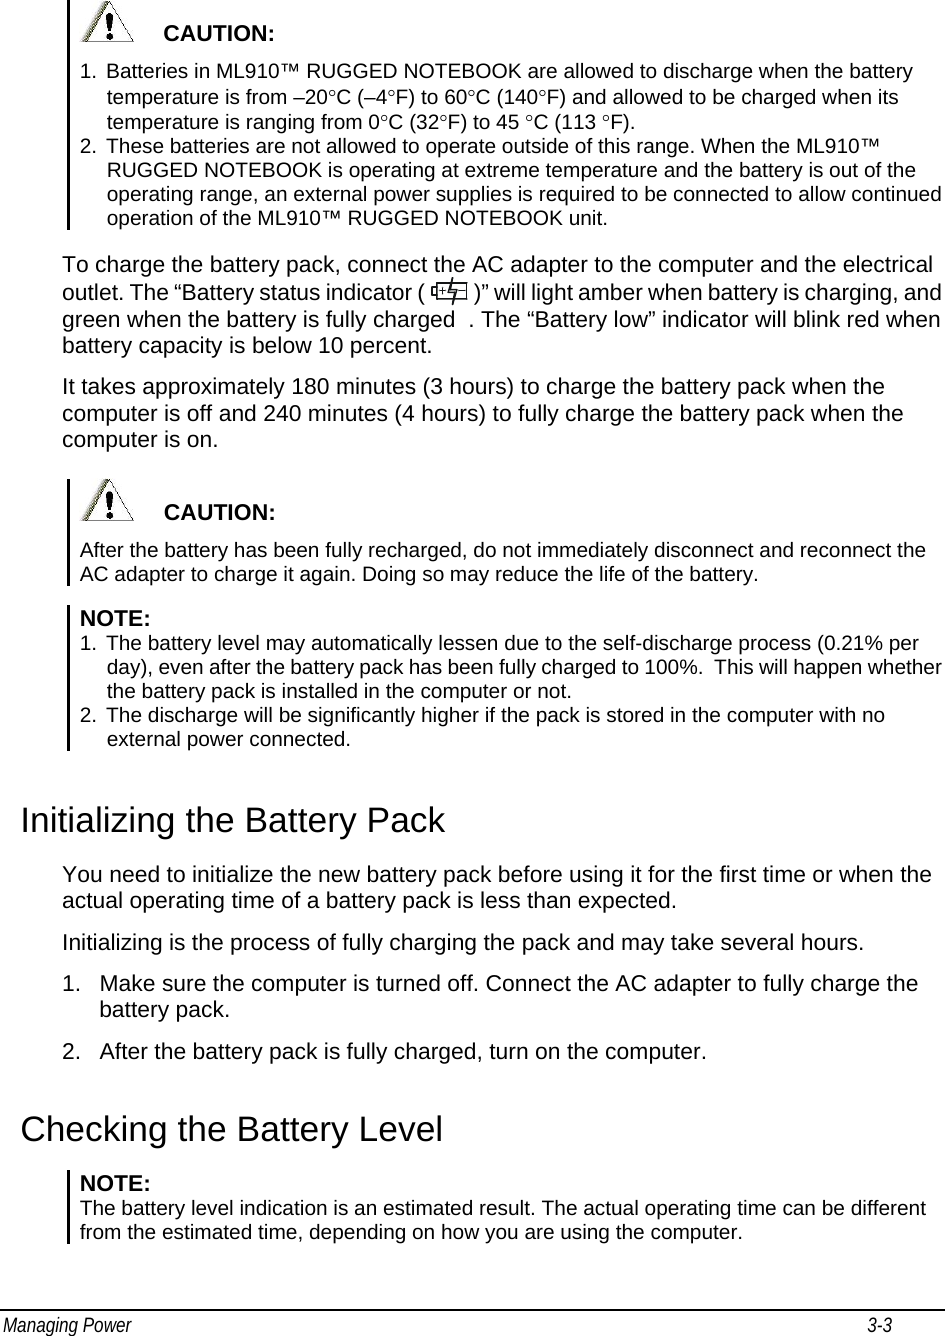 Managing Power                                                                                                                                                           3-3                                          CAUTION: 1.  Batteries in ML910™ RUGGED NOTEBOOK are allowed to discharge when the battery temperature is from –20°C (–4°F) to 60°C (140°F) and allowed to be charged when its temperature is ranging from 0°C (32°F) to 45 °C (113 °F). 2.  These batteries are not allowed to operate outside of this range. When the ML910™ RUGGED NOTEBOOK is operating at extreme temperature and the battery is out of the operating range, an external power supplies is required to be connected to allow continued operation of the ML910™ RUGGED NOTEBOOK unit. To charge the battery pack, connect the AC adapter to the computer and the electrical outlet. The “Battery status indicator (   )” will light amber when battery is charging, and green when the battery is fully charged  . The “Battery low” indicator will blink red when battery capacity is below 10 percent. It takes approximately 180 minutes (3 hours) to charge the battery pack when the computer is off and 240 minutes (4 hours) to fully charge the battery pack when the computer is on.       CAUTION: After the battery has been fully recharged, do not immediately disconnect and reconnect the AC adapter to charge it again. Doing so may reduce the life of the battery.  NOTE:  1.  The battery level may automatically lessen due to the self-discharge process (0.21% per day), even after the battery pack has been fully charged to 100%.  This will happen whether the battery pack is installed in the computer or not. 2.  The discharge will be significantly higher if the pack is stored in the computer with no external power connected.  Initializing the Battery Pack You need to initialize the new battery pack before using it for the first time or when the actual operating time of a battery pack is less than expected. Initializing is the process of fully charging the pack and may take several hours. 1.  Make sure the computer is turned off. Connect the AC adapter to fully charge the battery pack. 2.  After the battery pack is fully charged, turn on the computer. Checking the Battery Level NOTE:  The battery level indication is an estimated result. The actual operating time can be different from the estimated time, depending on how you are using the computer.  